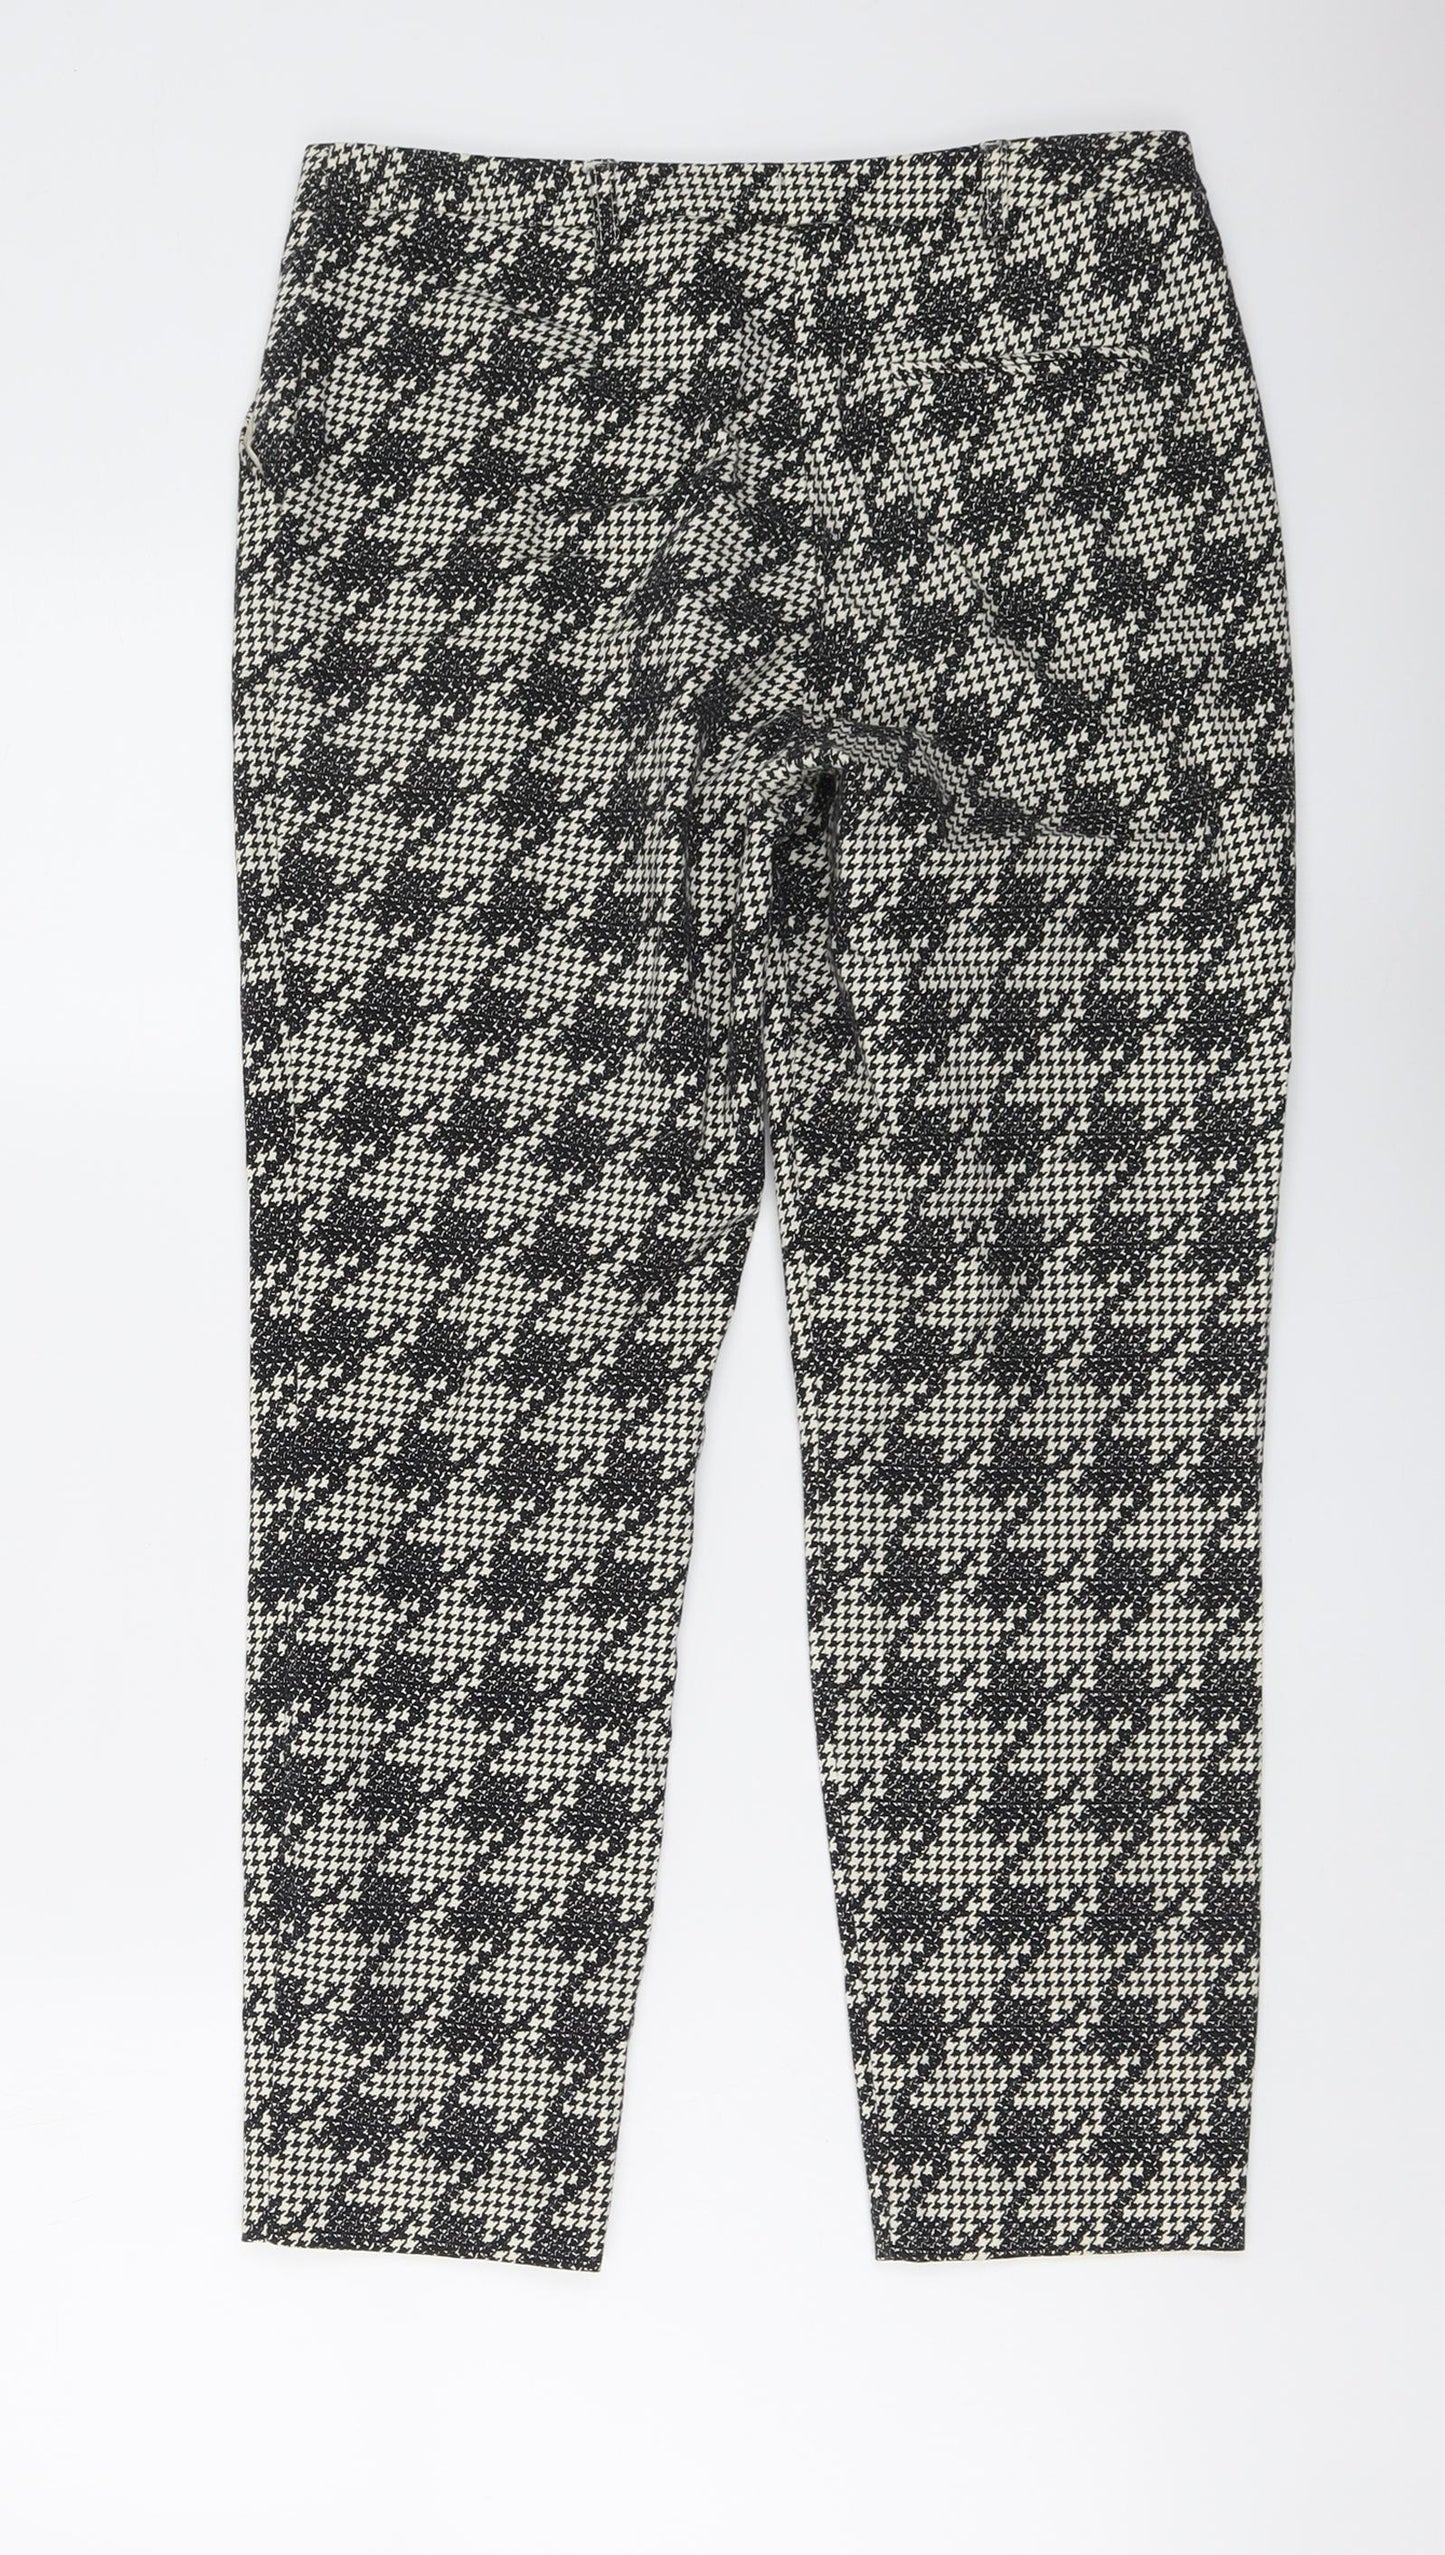 Topshop Womens Black Geometric Cotton Dress Pants Trousers Size 10 L25 in Regular Button - Houndstooth Pattern